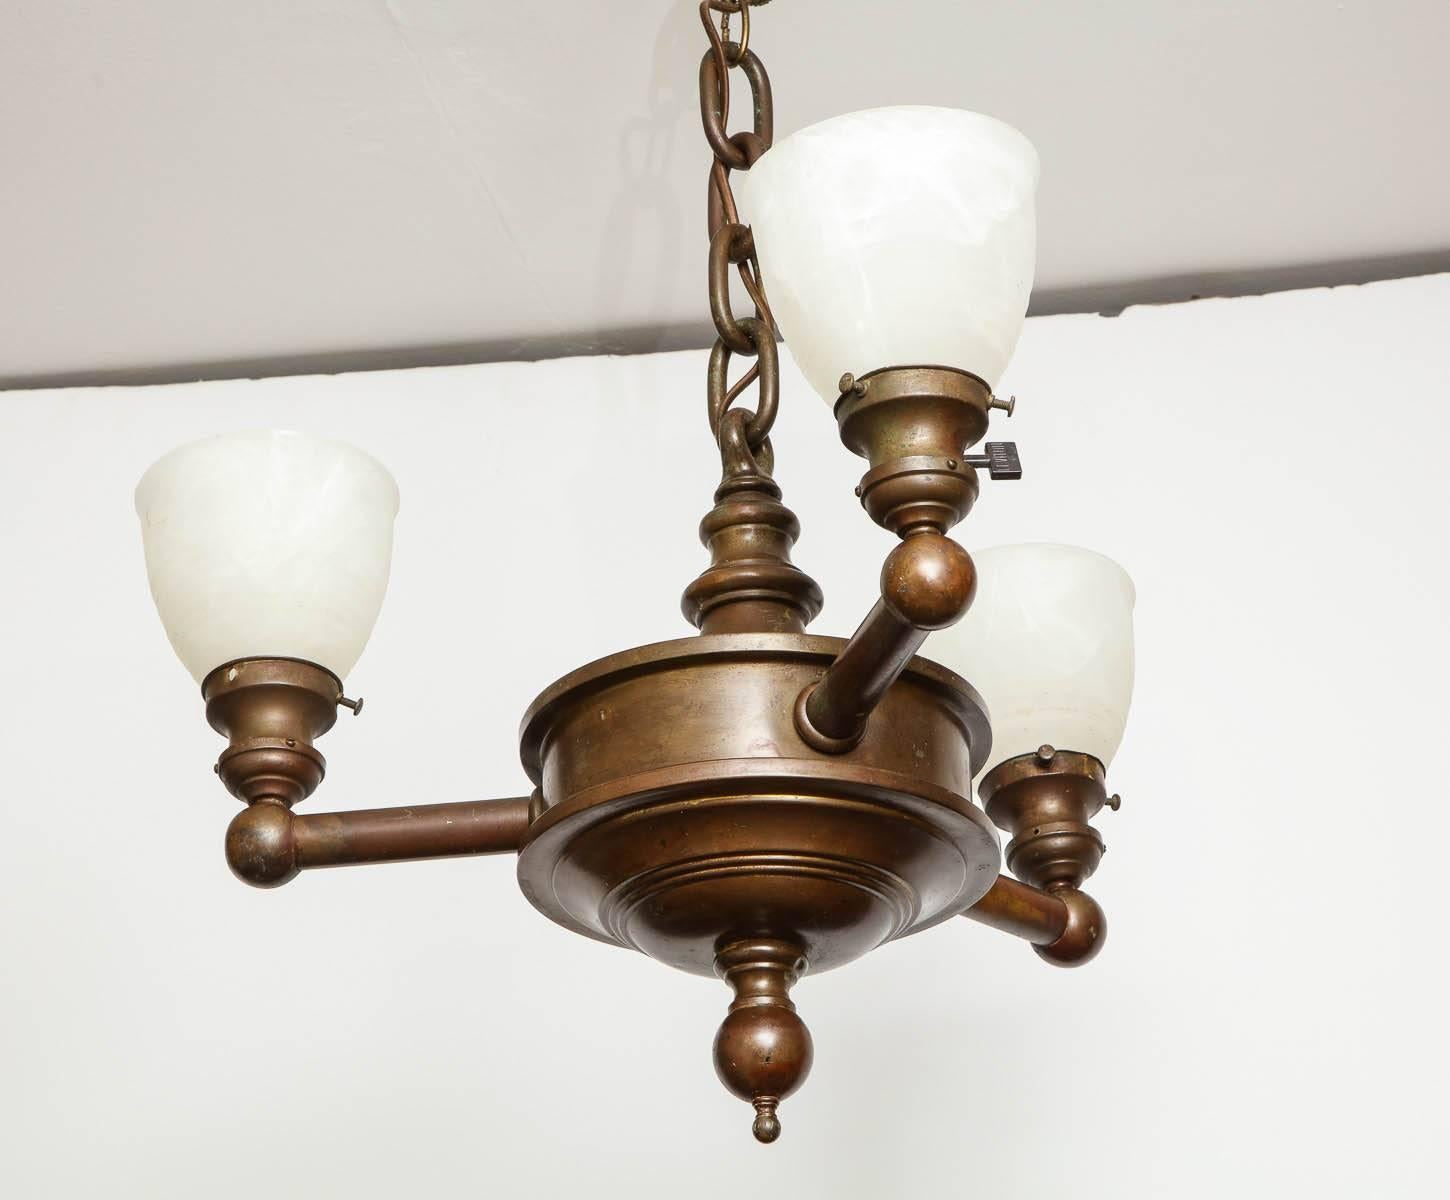 Fine early 20th century patinated bronze three light hanging fixture with frosted shades and strong design.